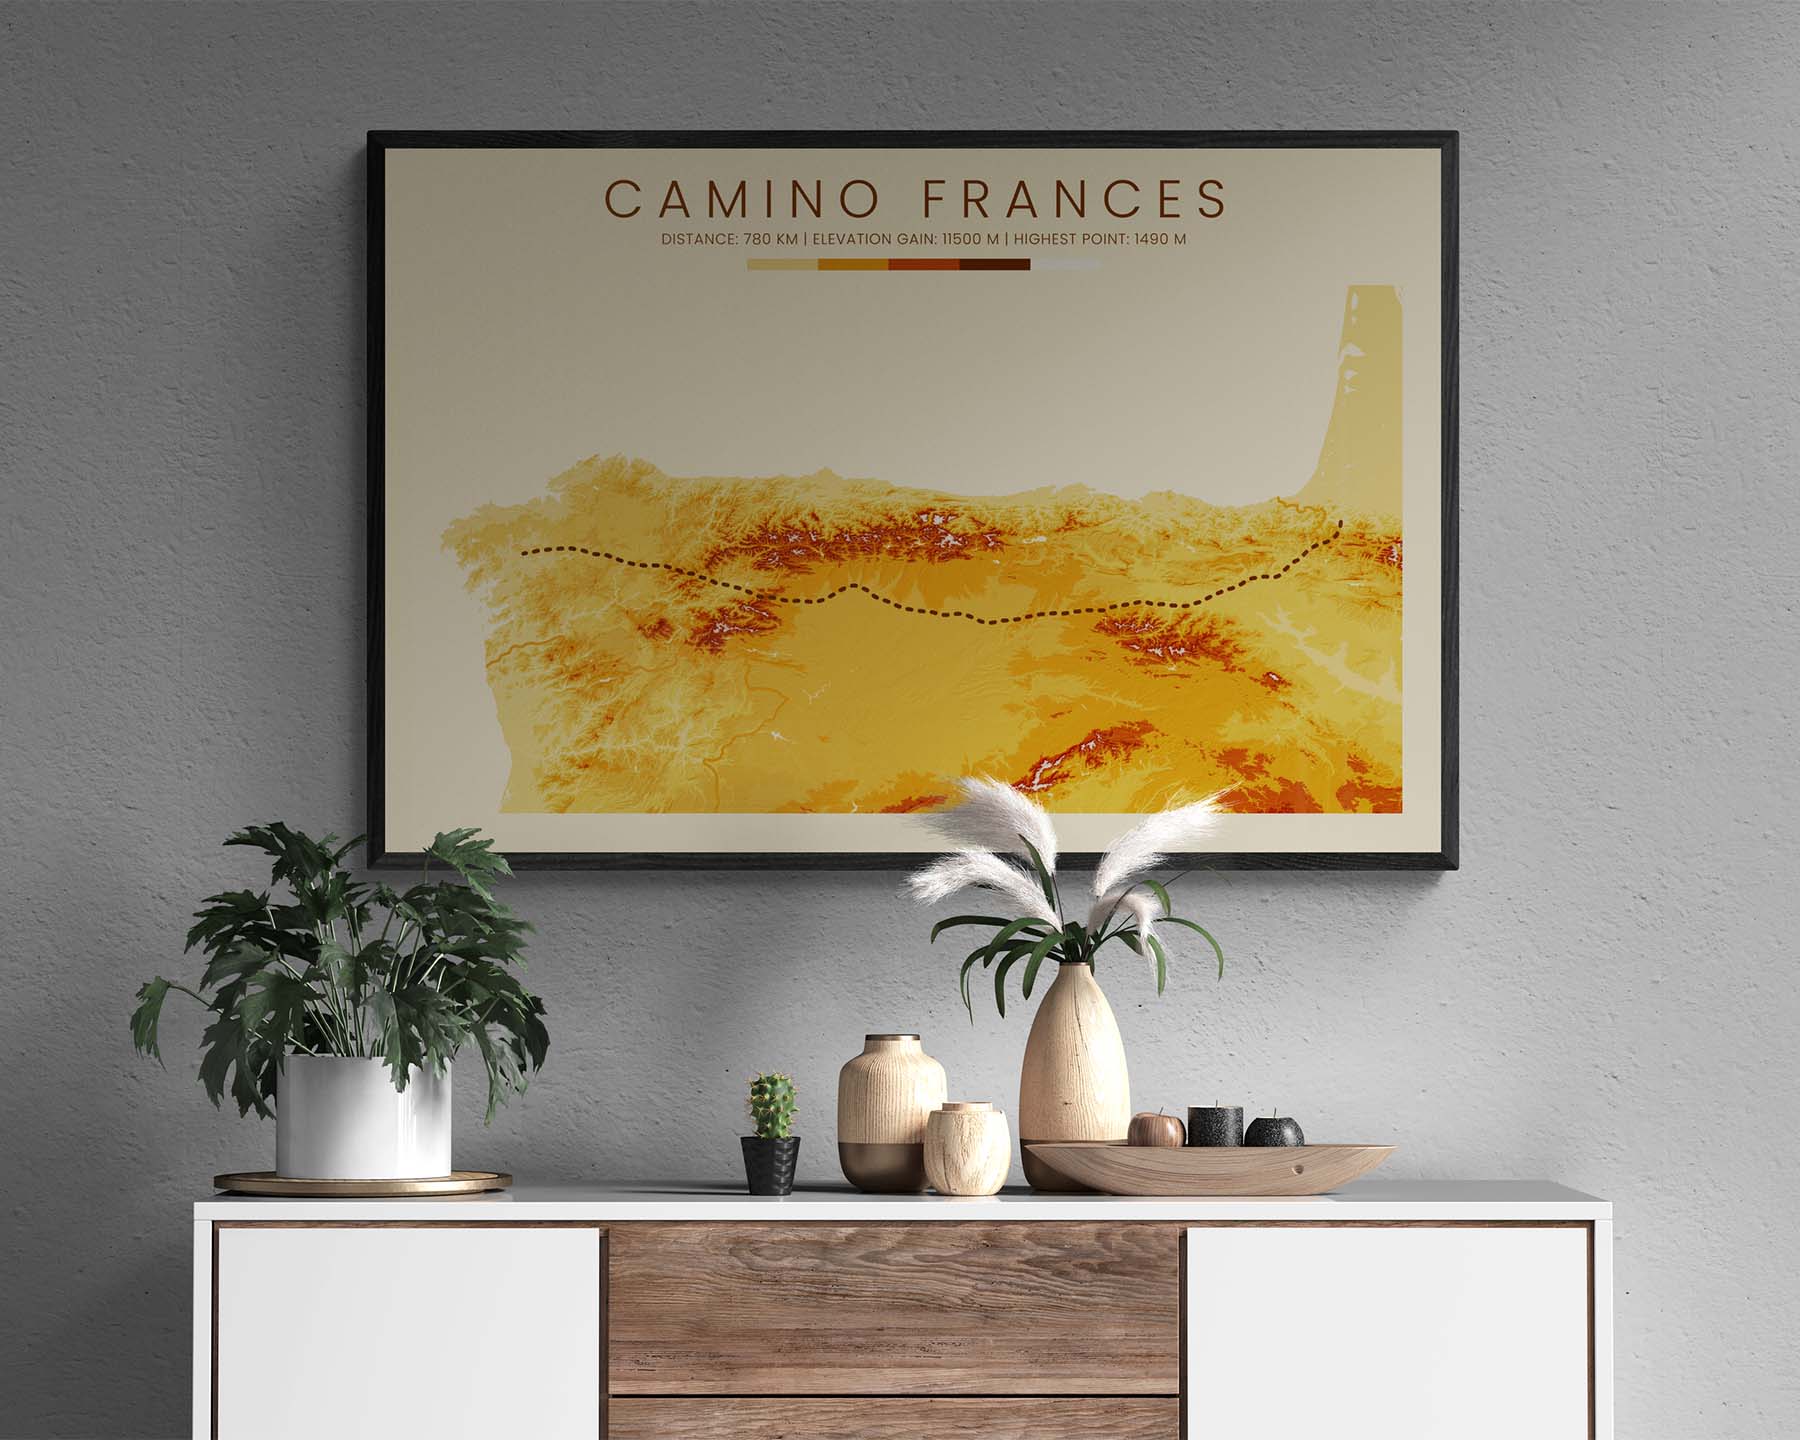 Camino Frances (Pyrenees) Trek Print with Topographic Map in Modern Interior Decor